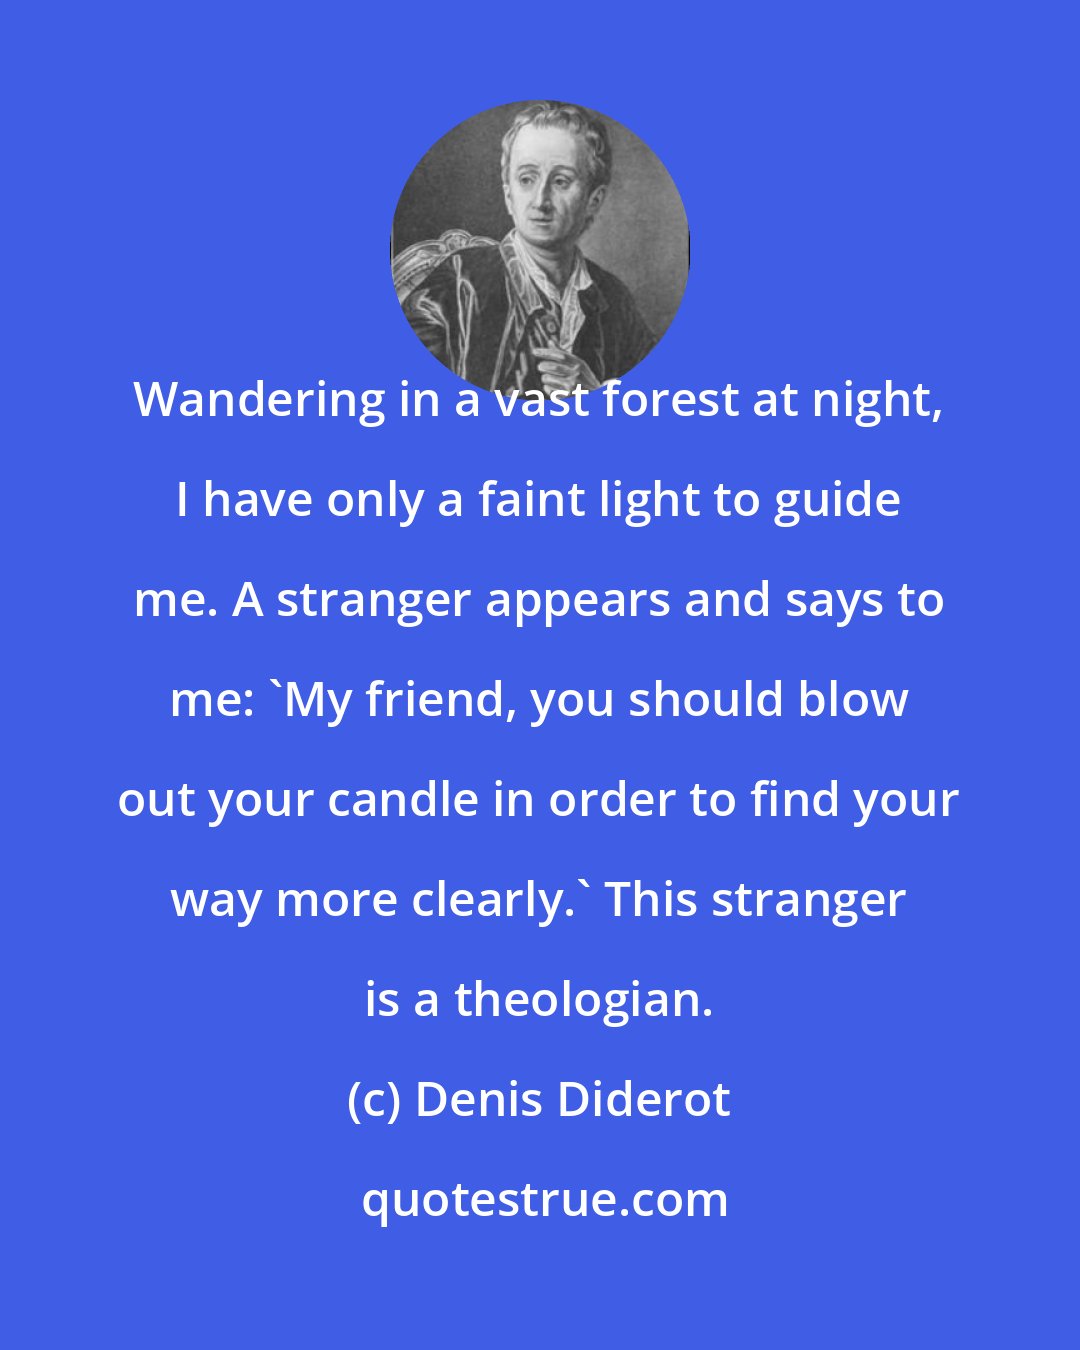 Denis Diderot: Wandering in a vast forest at night, I have only a faint light to guide me. A stranger appears and says to me: 'My friend, you should blow out your candle in order to find your way more clearly.' This stranger is a theologian.